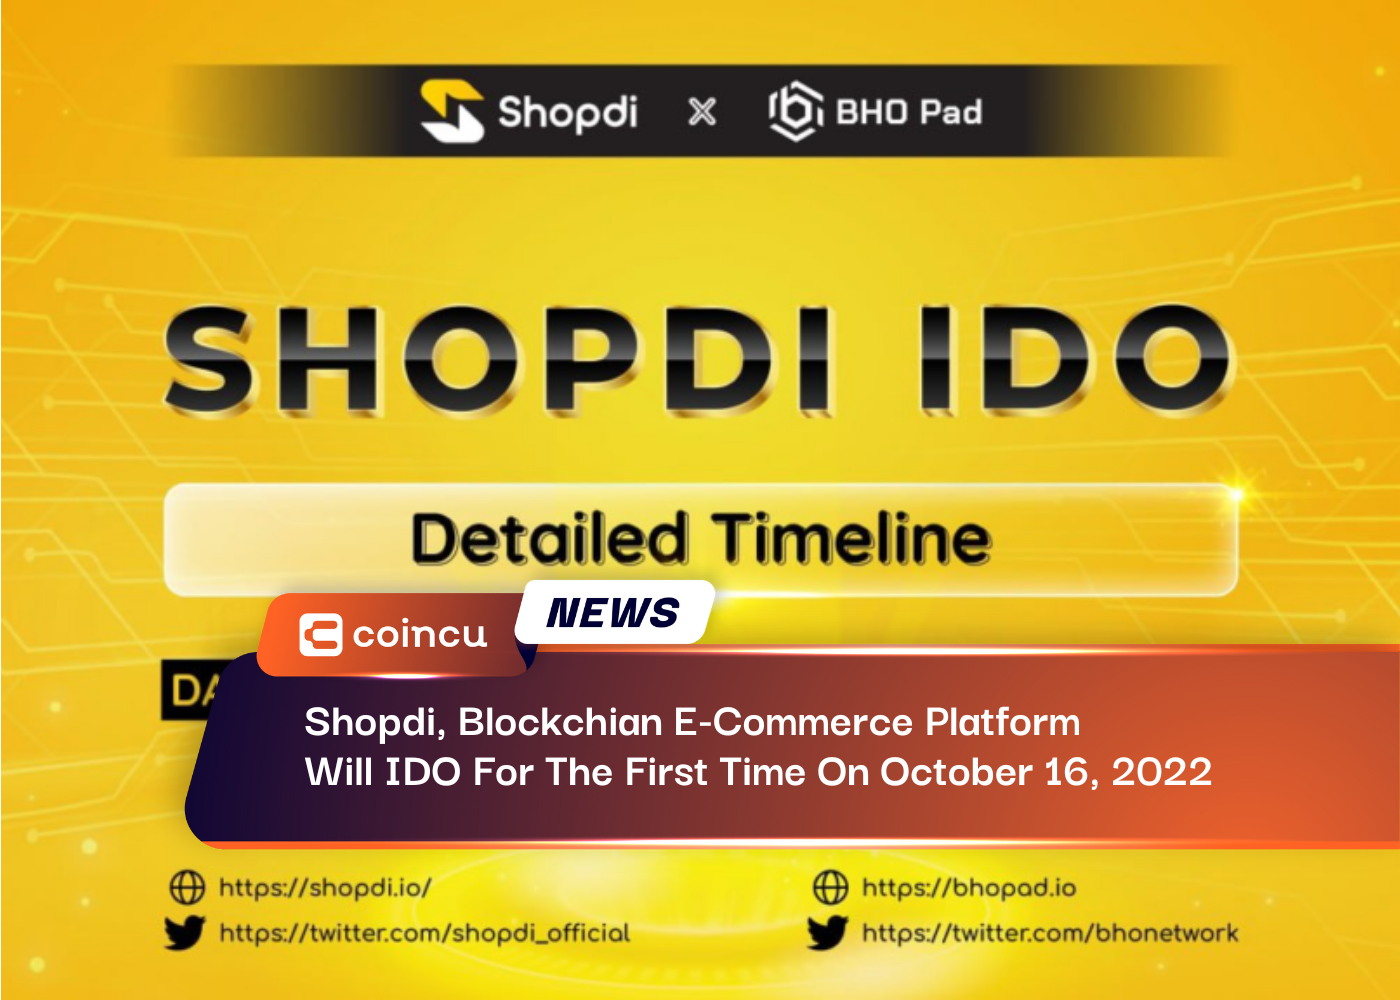 Shopdi, Blockchian E-Commerce Platform Will IDO For The First Time On October 16, 2022